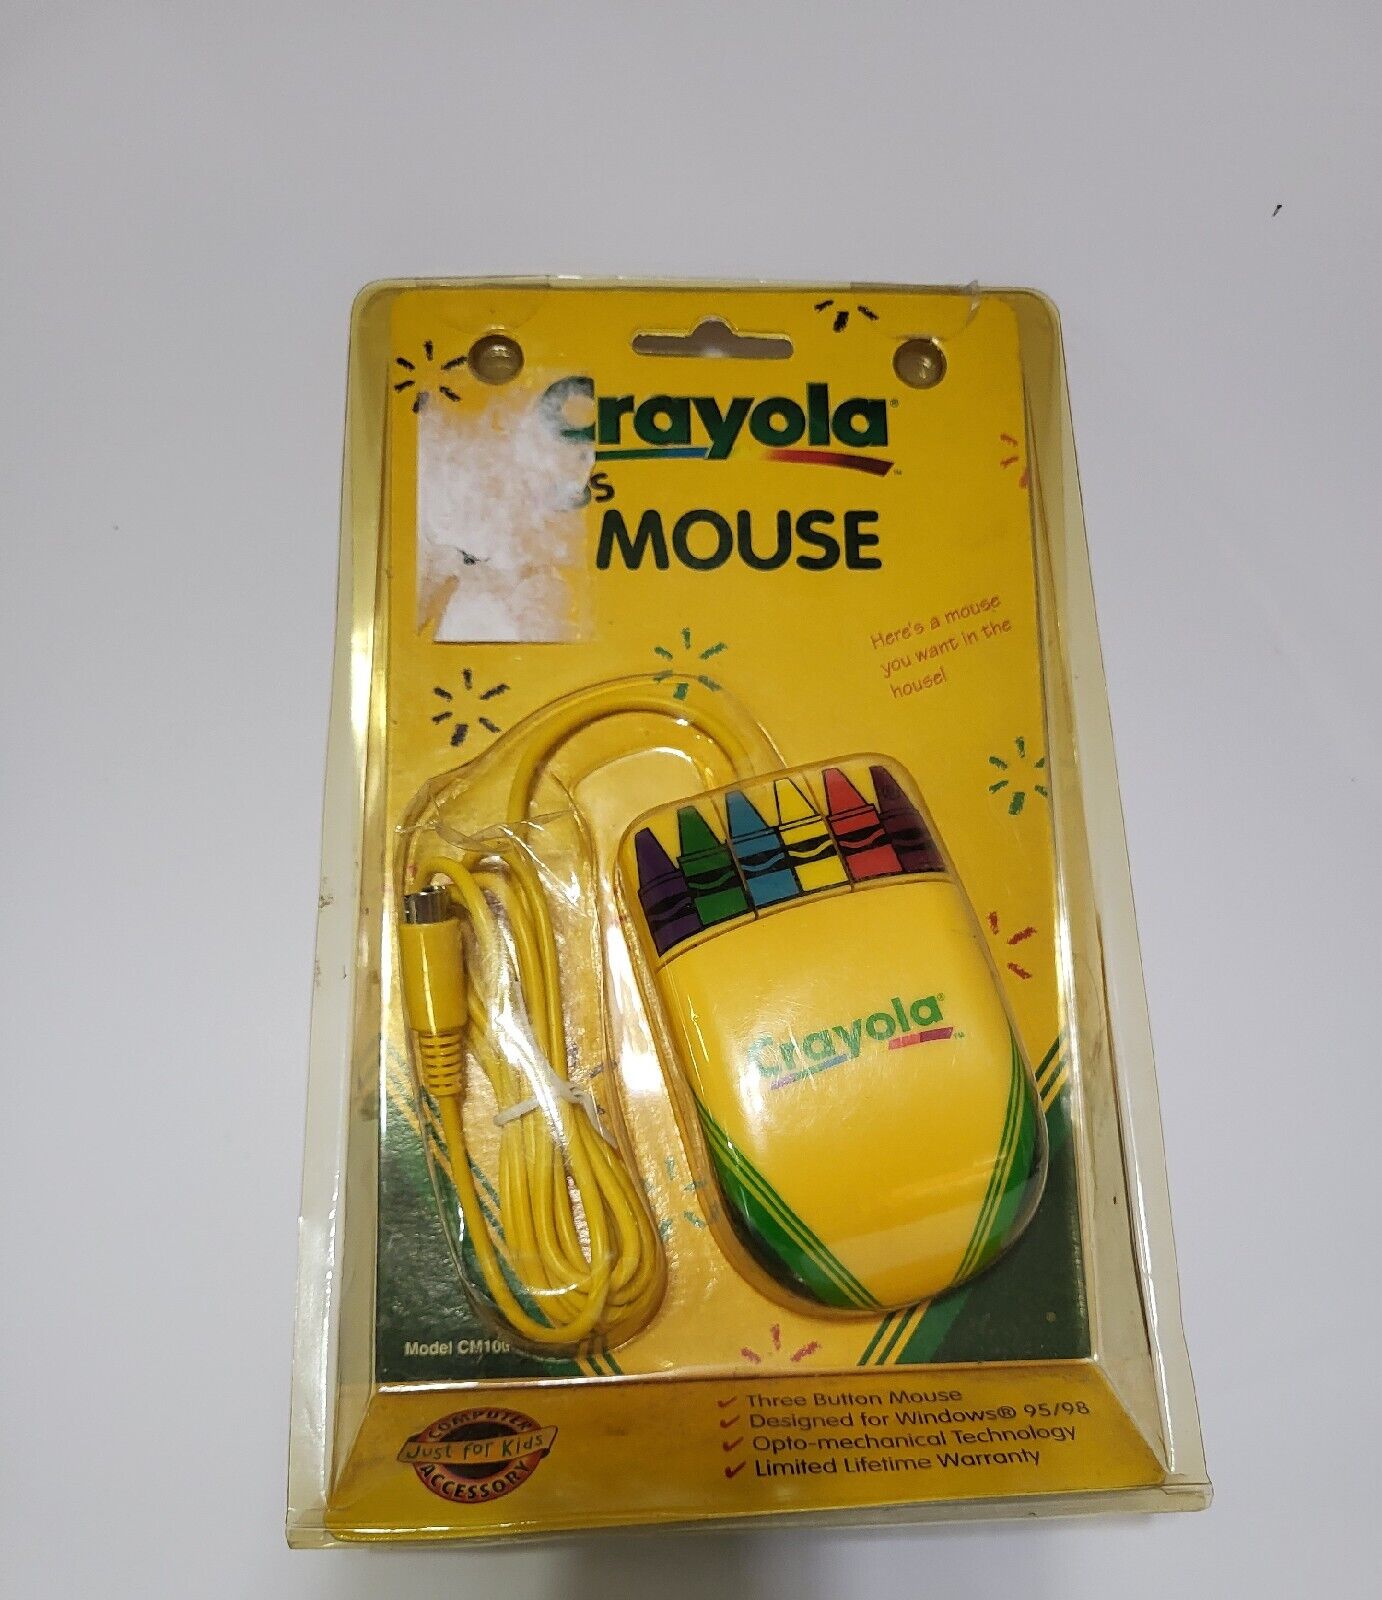 Vintage Crayola Kids Computer Wired Mouse CM100 w/ Driver Windows 95/98 NEW